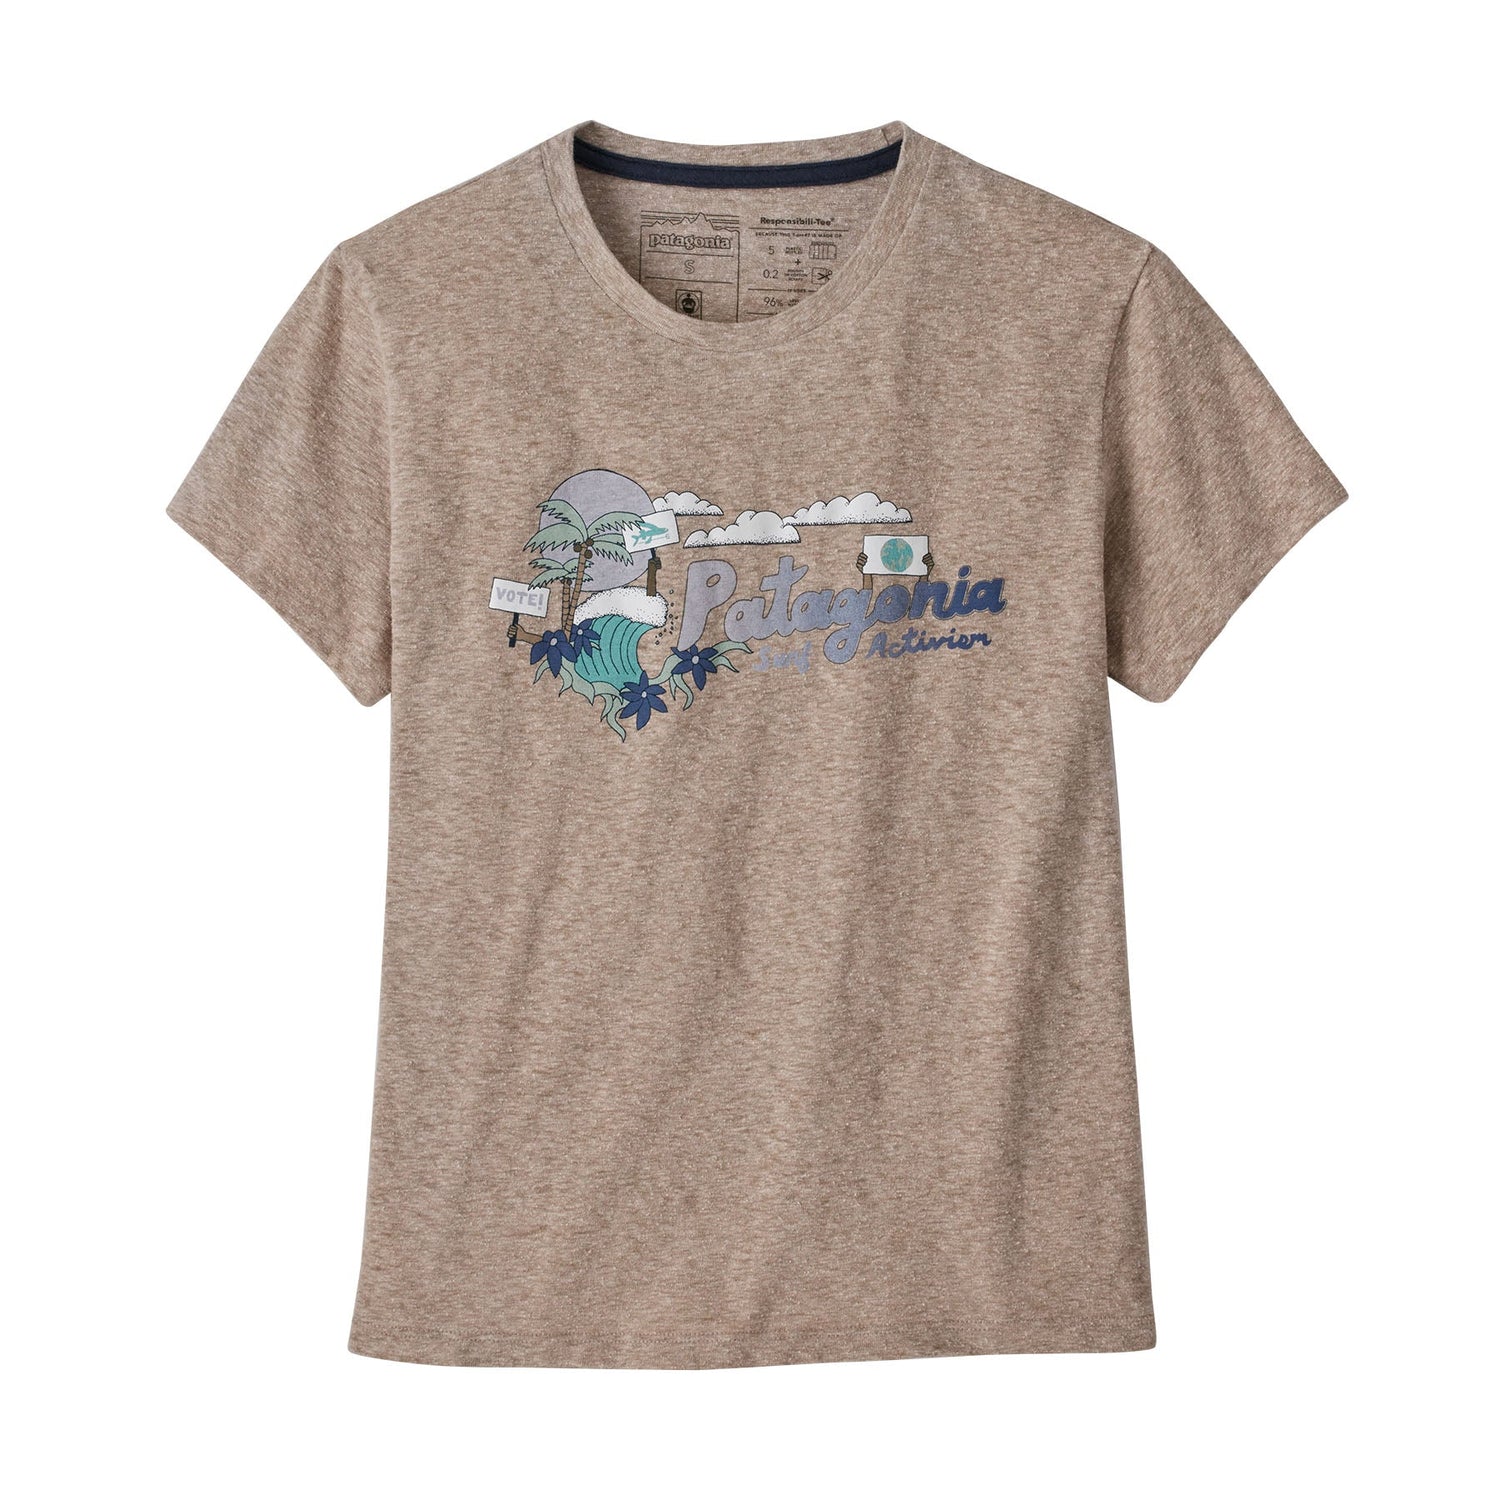 Patagonia W's Palm Protest Responsibili-Tee - Recycled Cotton & Recycled Polyester Shroom Taupe Shirt